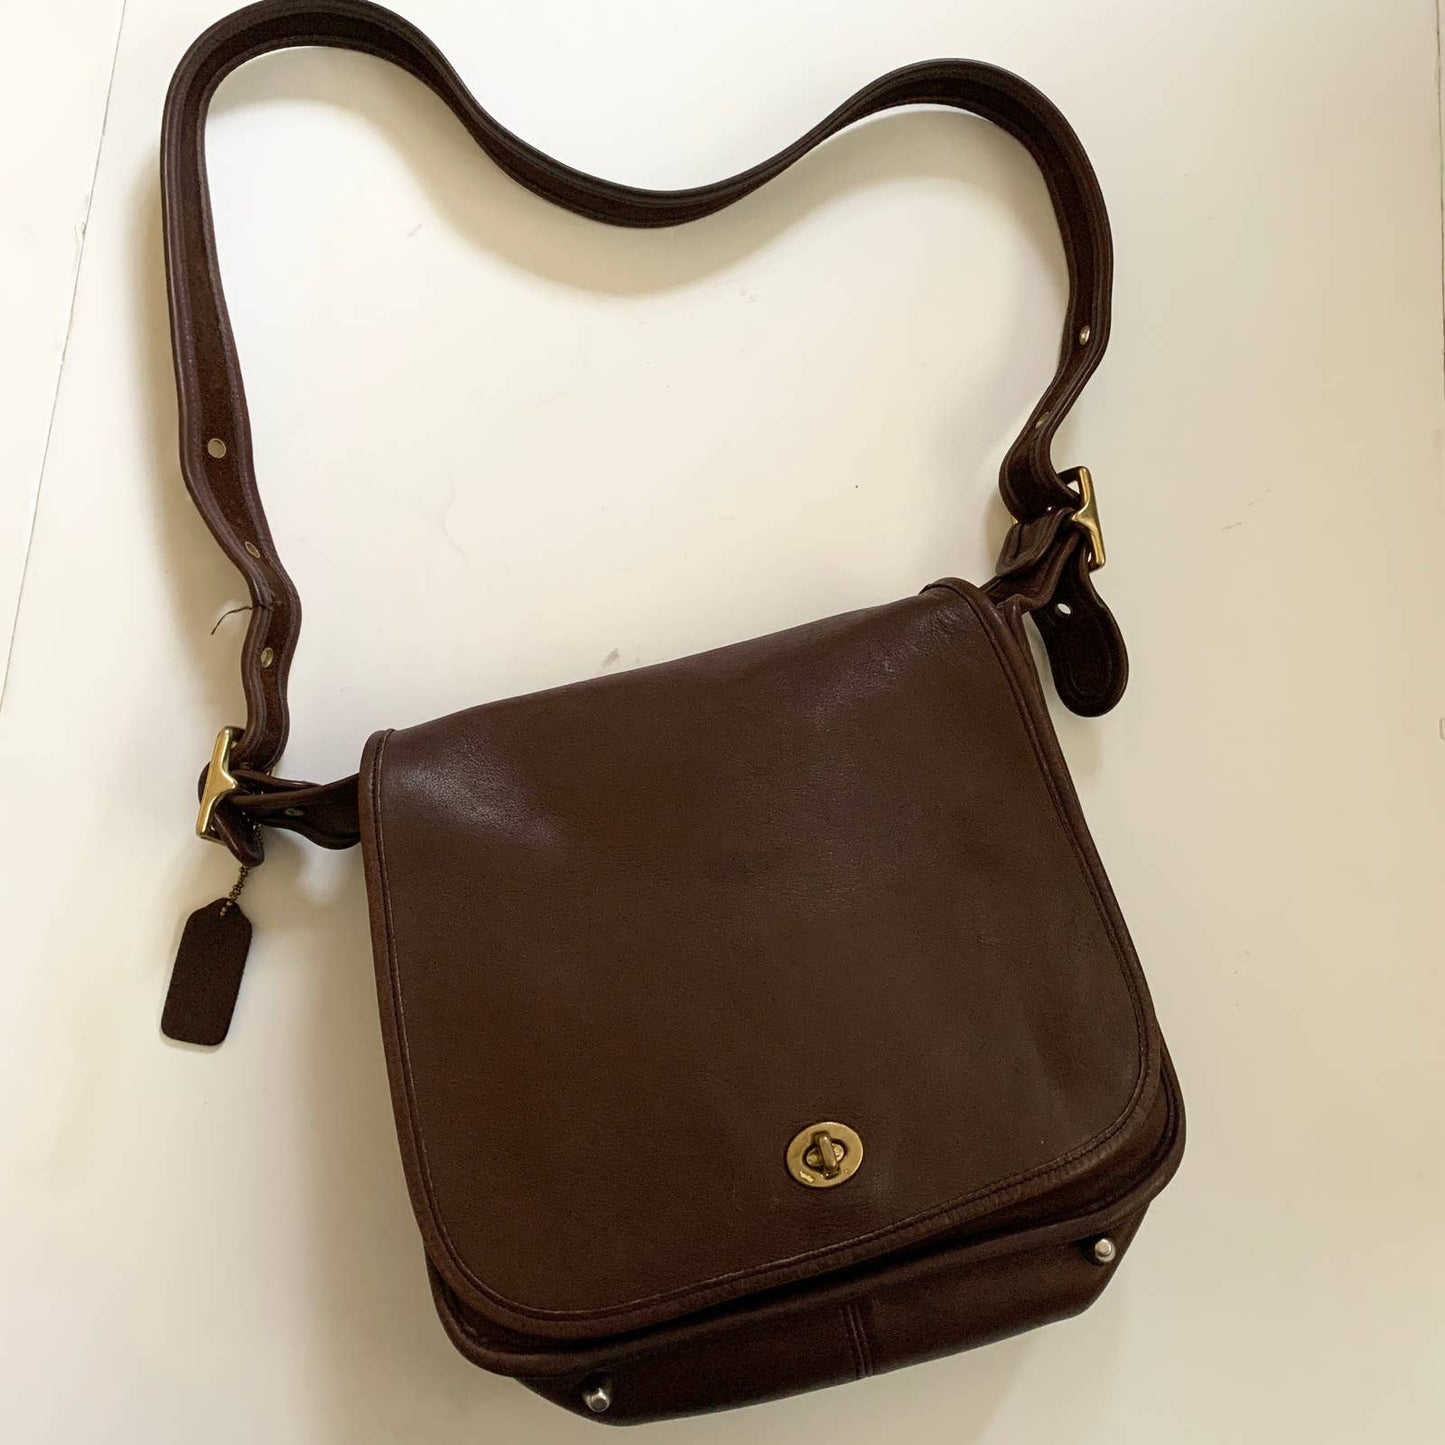 Best Coach Purse Small Brown for sale in Mobile, Alabama for 2024